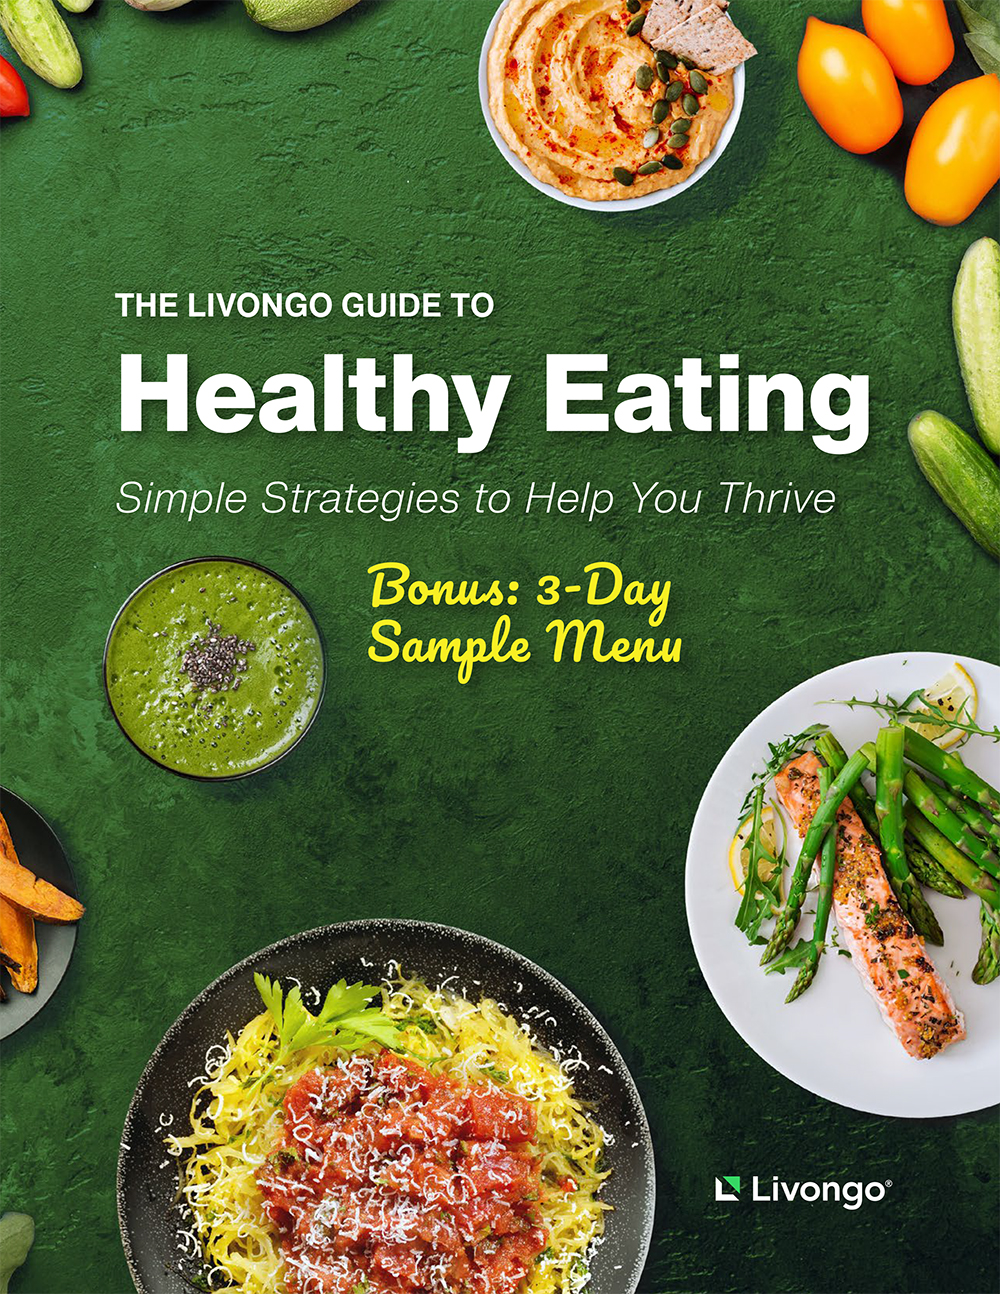 TheLivongoGuideToHealthyEating_Cover.jpg